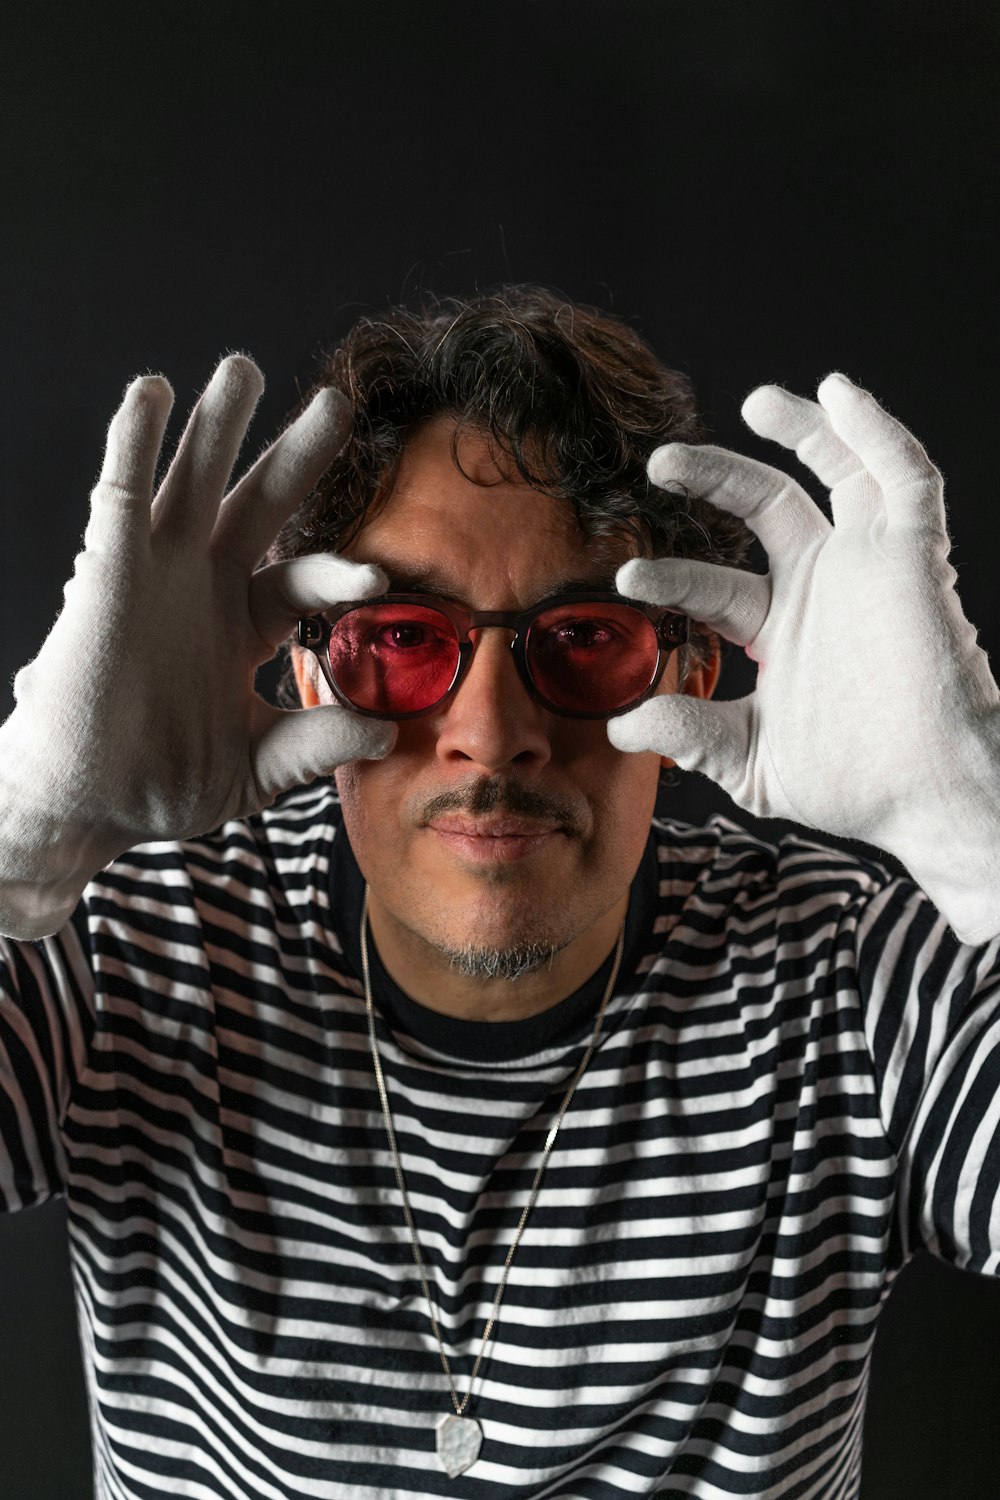 a man wearing white gloves and red glasses